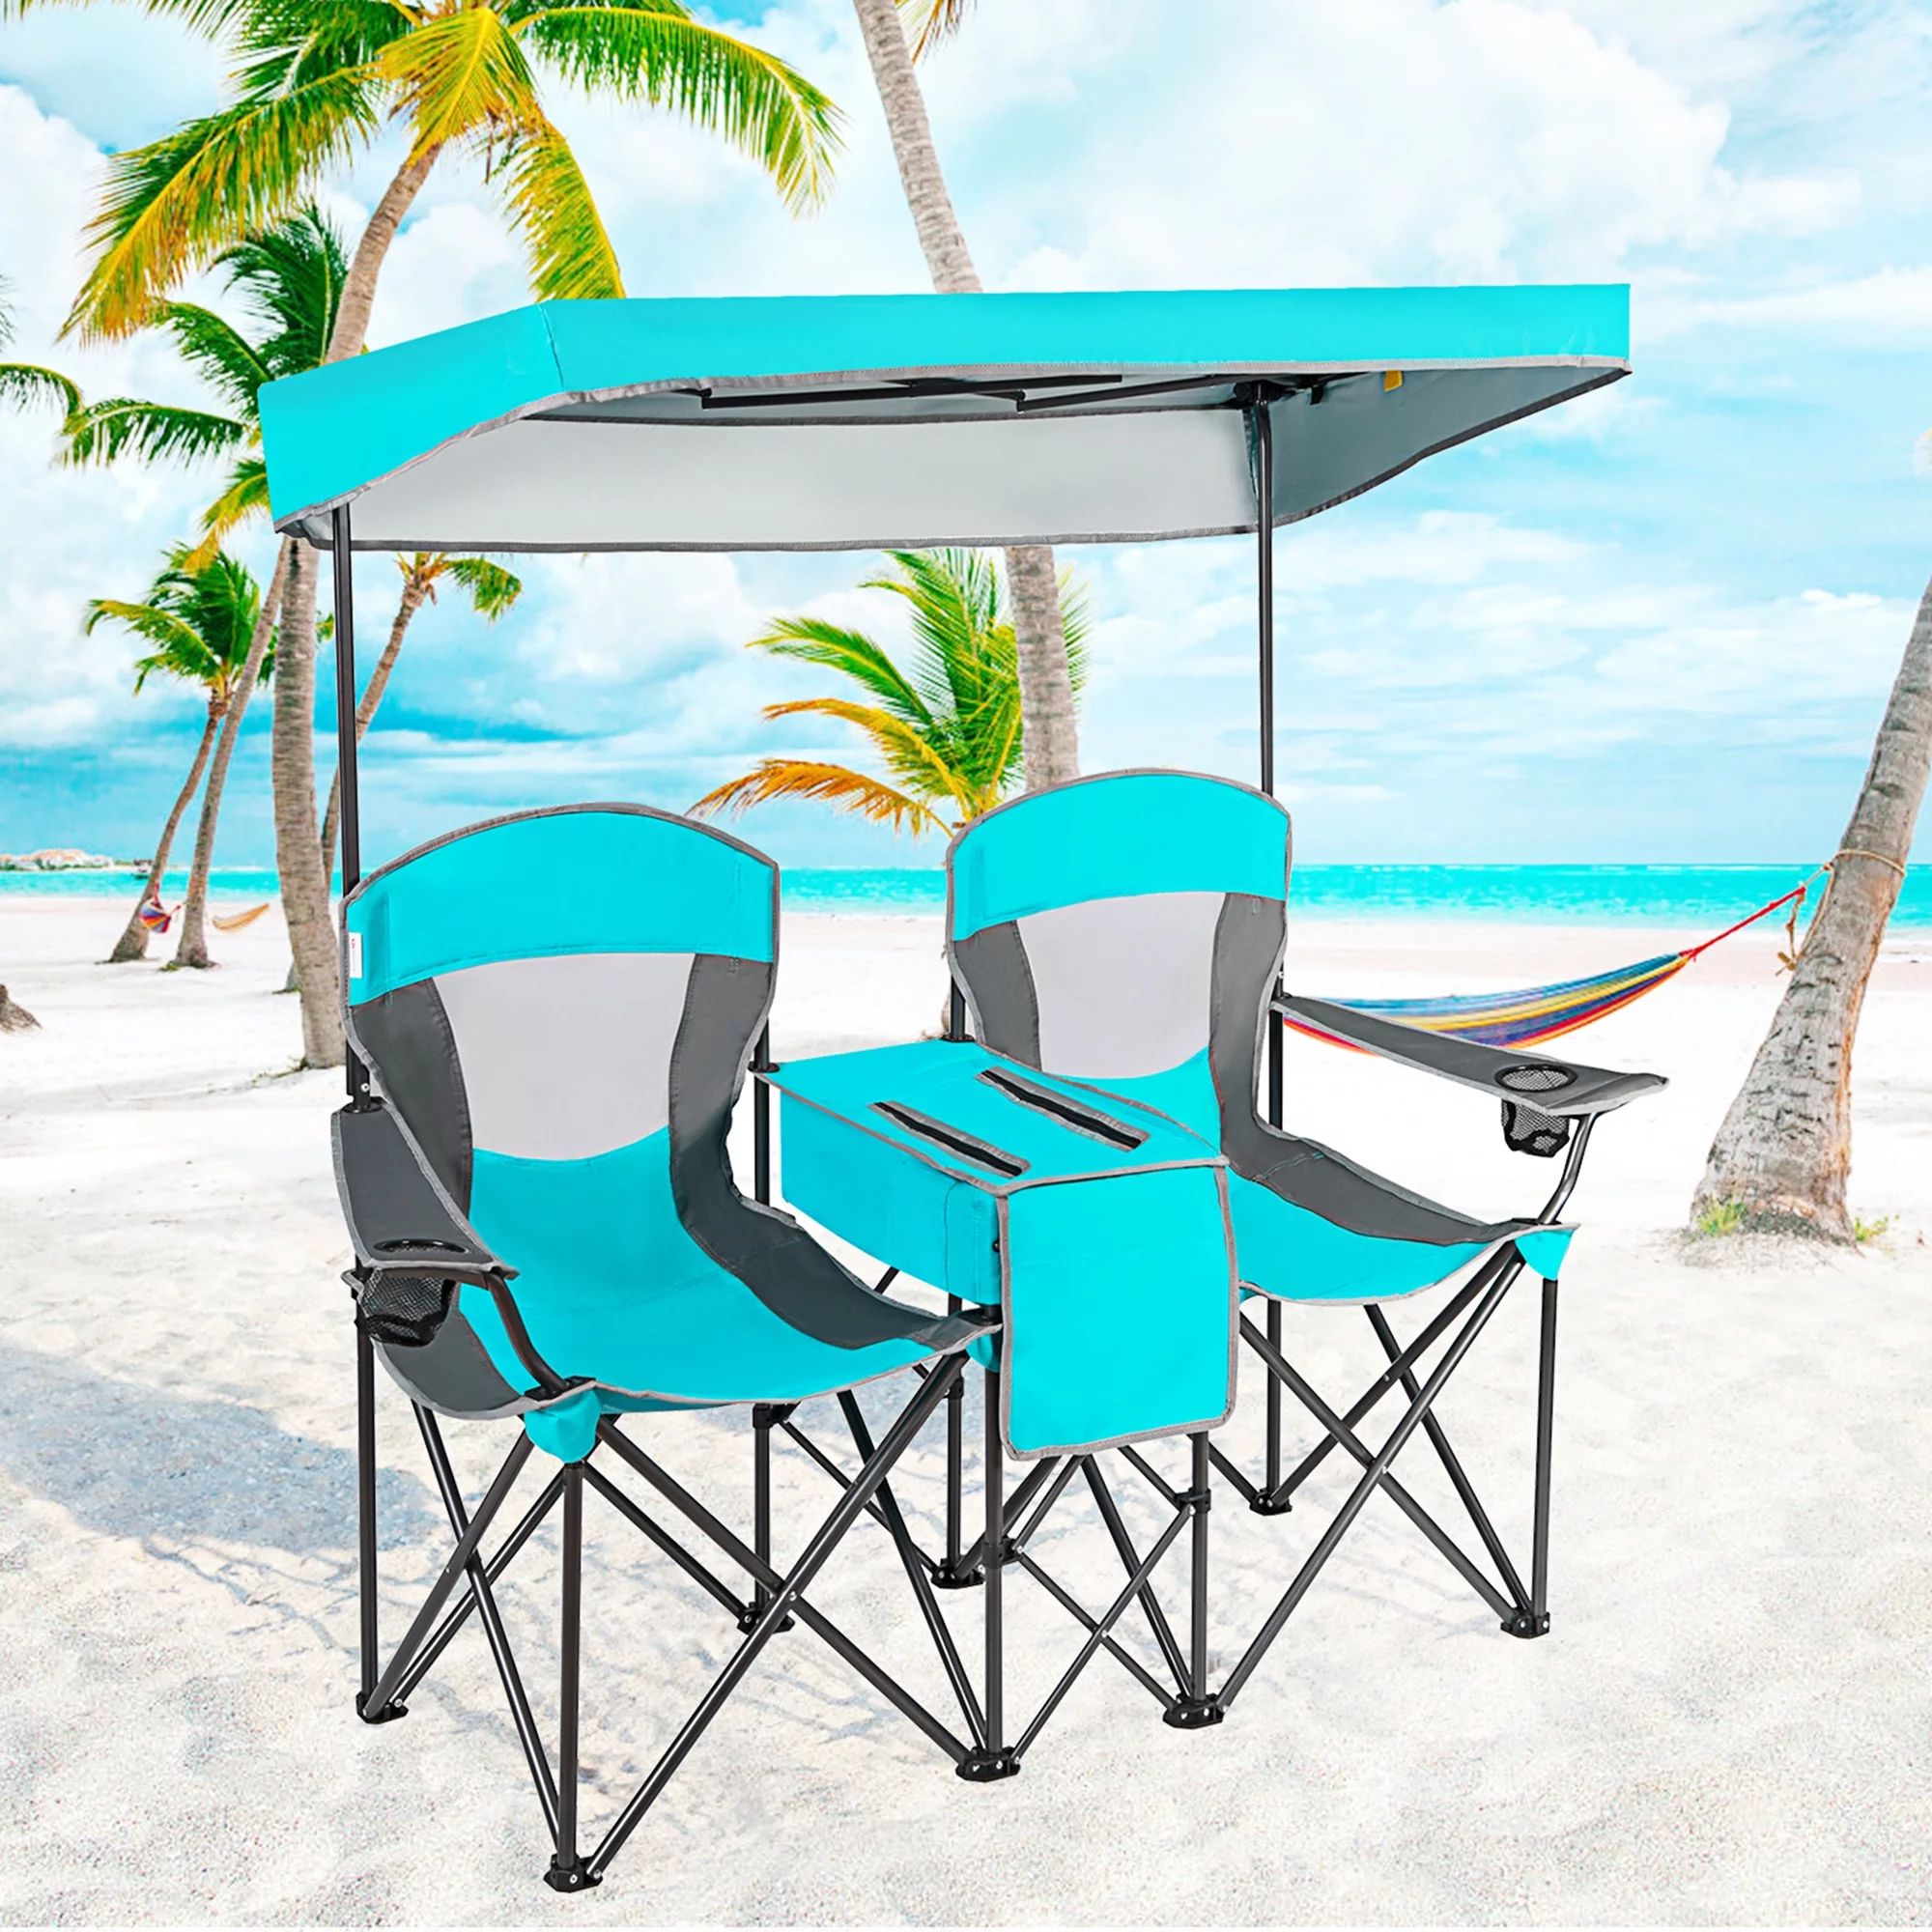 Gymax Folding 2-person Camping Chairs Double Sunshade Chairs w/ Canopy Turquoise | Walmart (US)